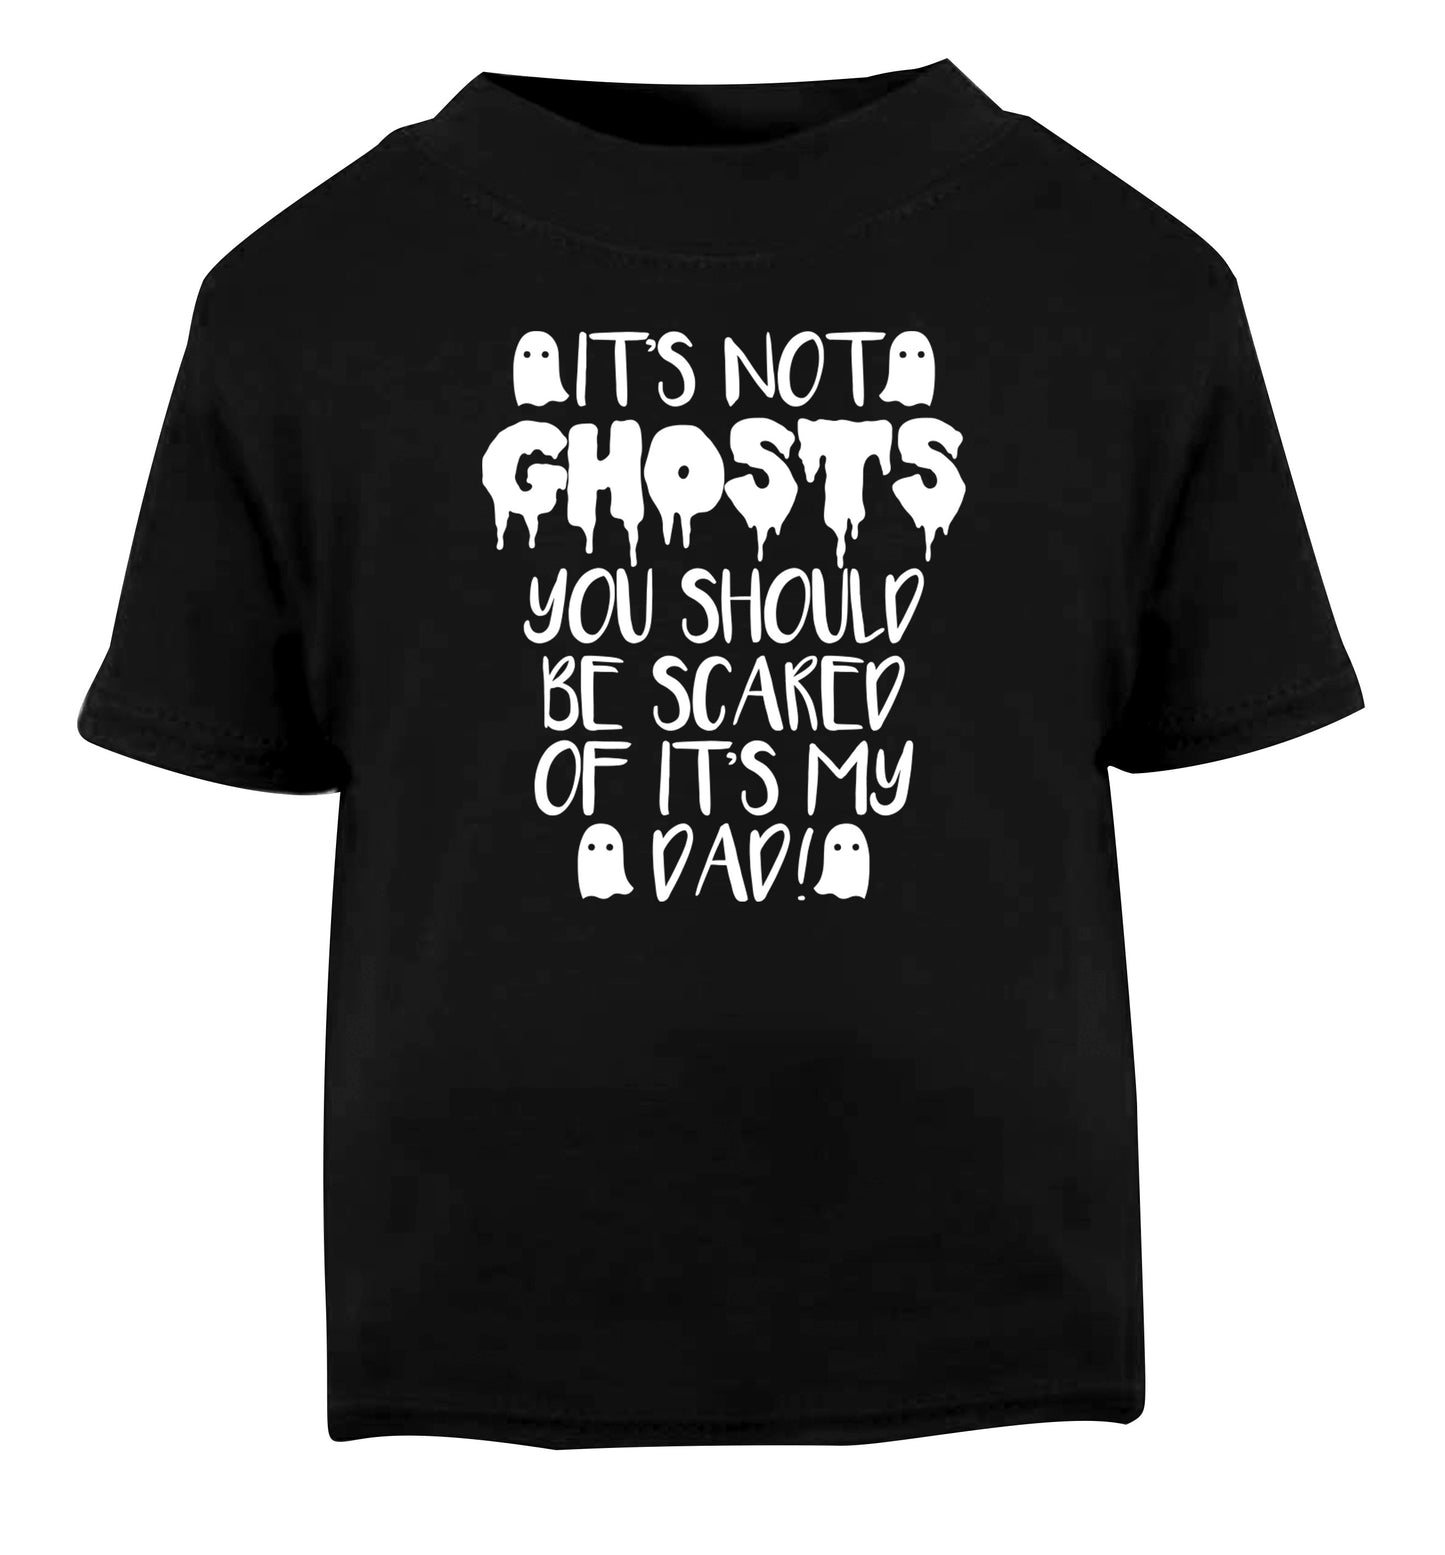 It's not ghosts you should be scared of it's my dad! Black Baby Toddler Tshirt 2 years